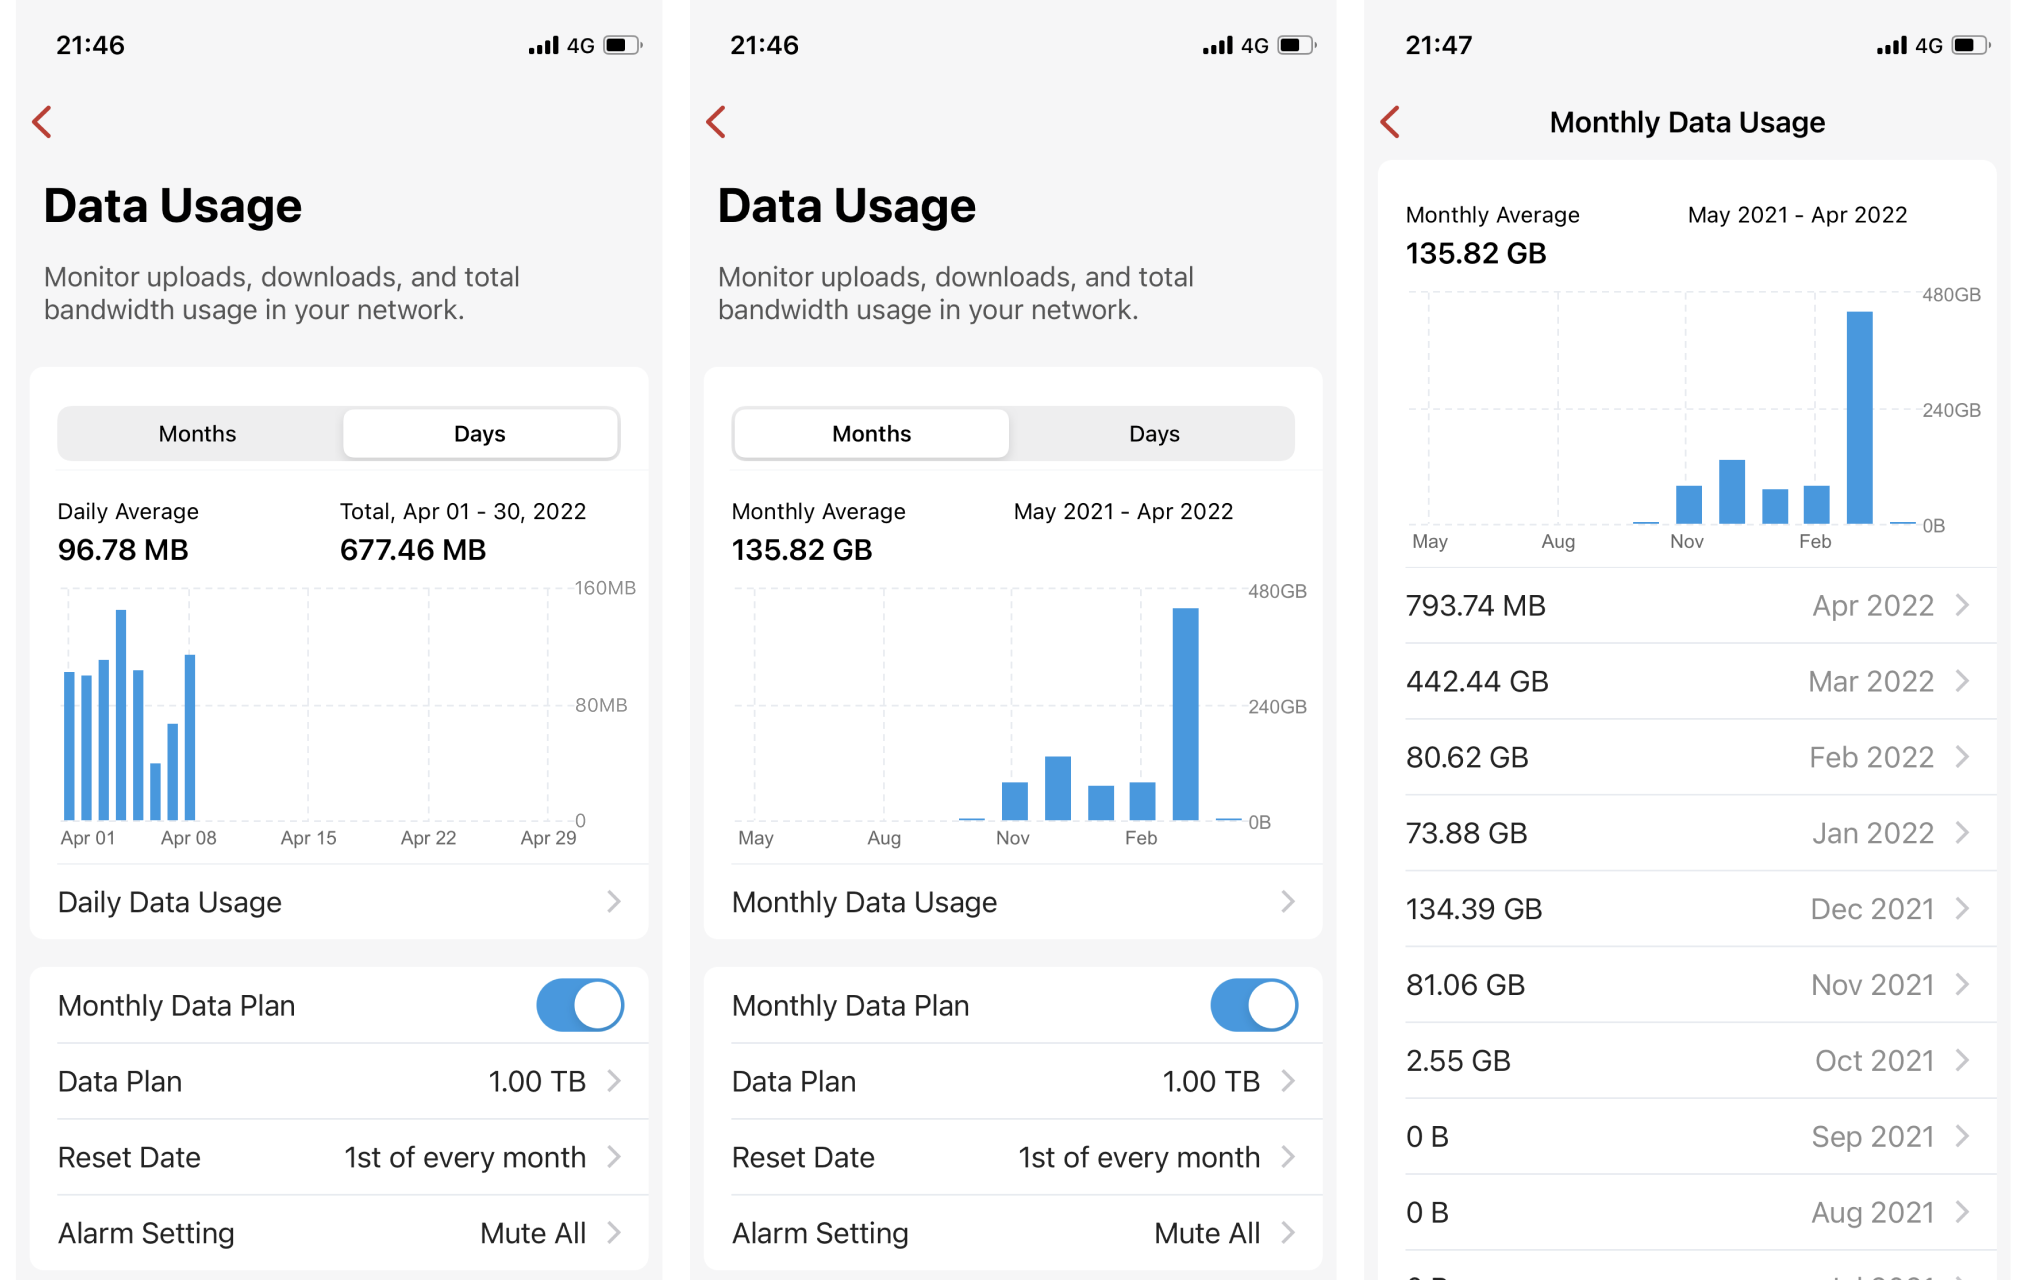 Monitoring Internet usage with monthly data usage insights